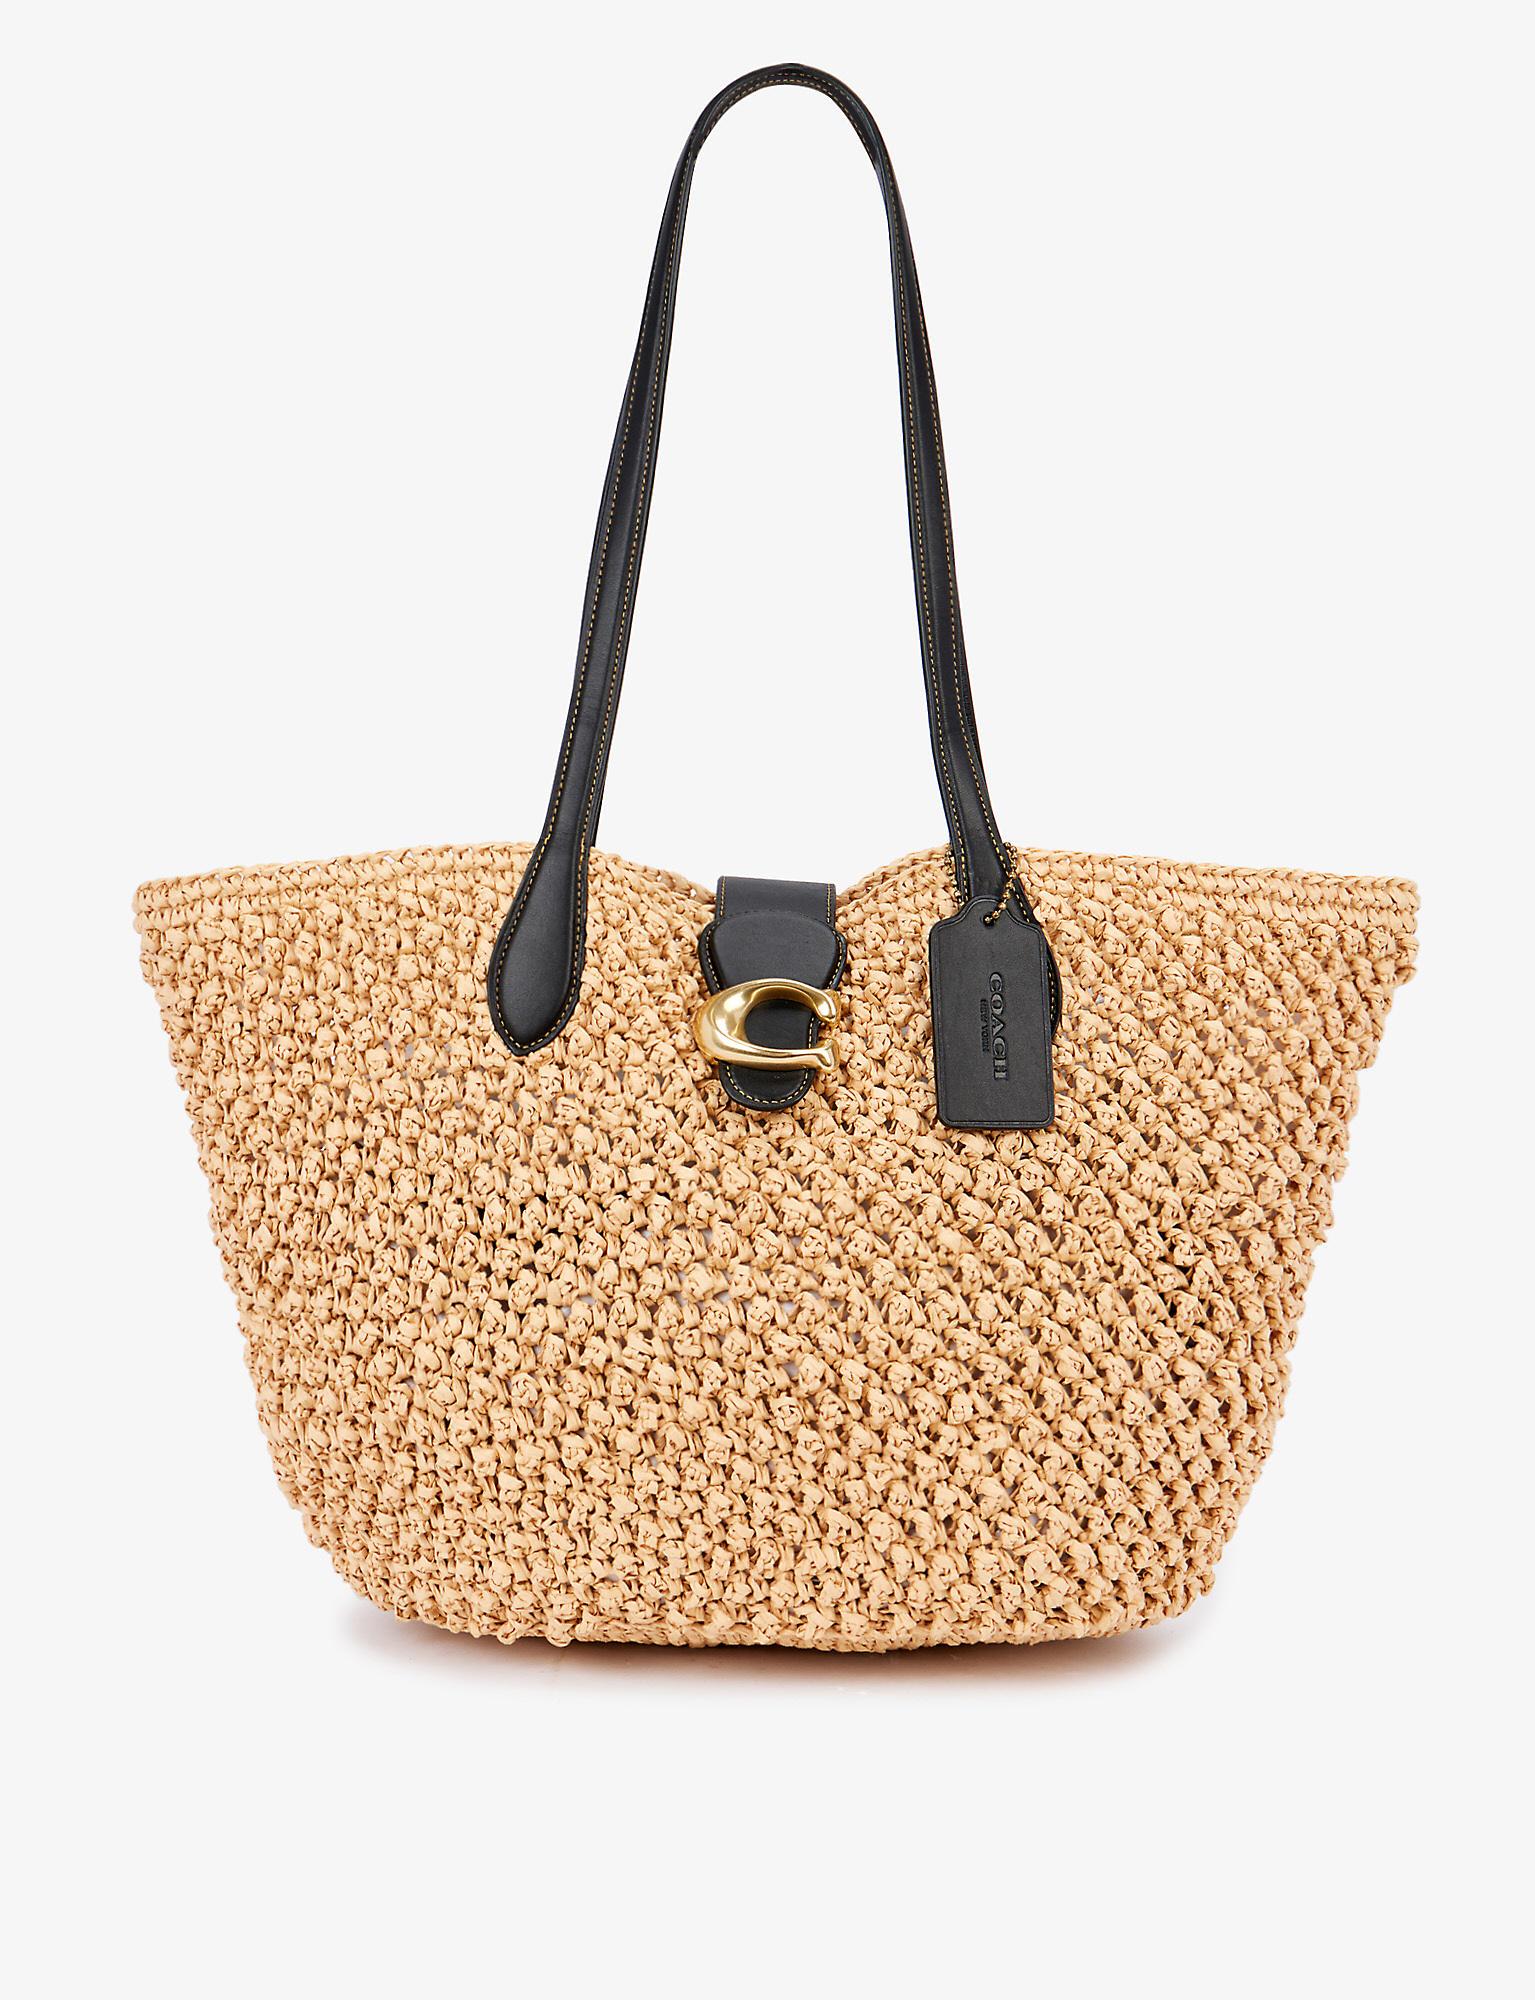 COACH Popcorn-textured Straw And Leather Tote Bag in Natural | Lyst